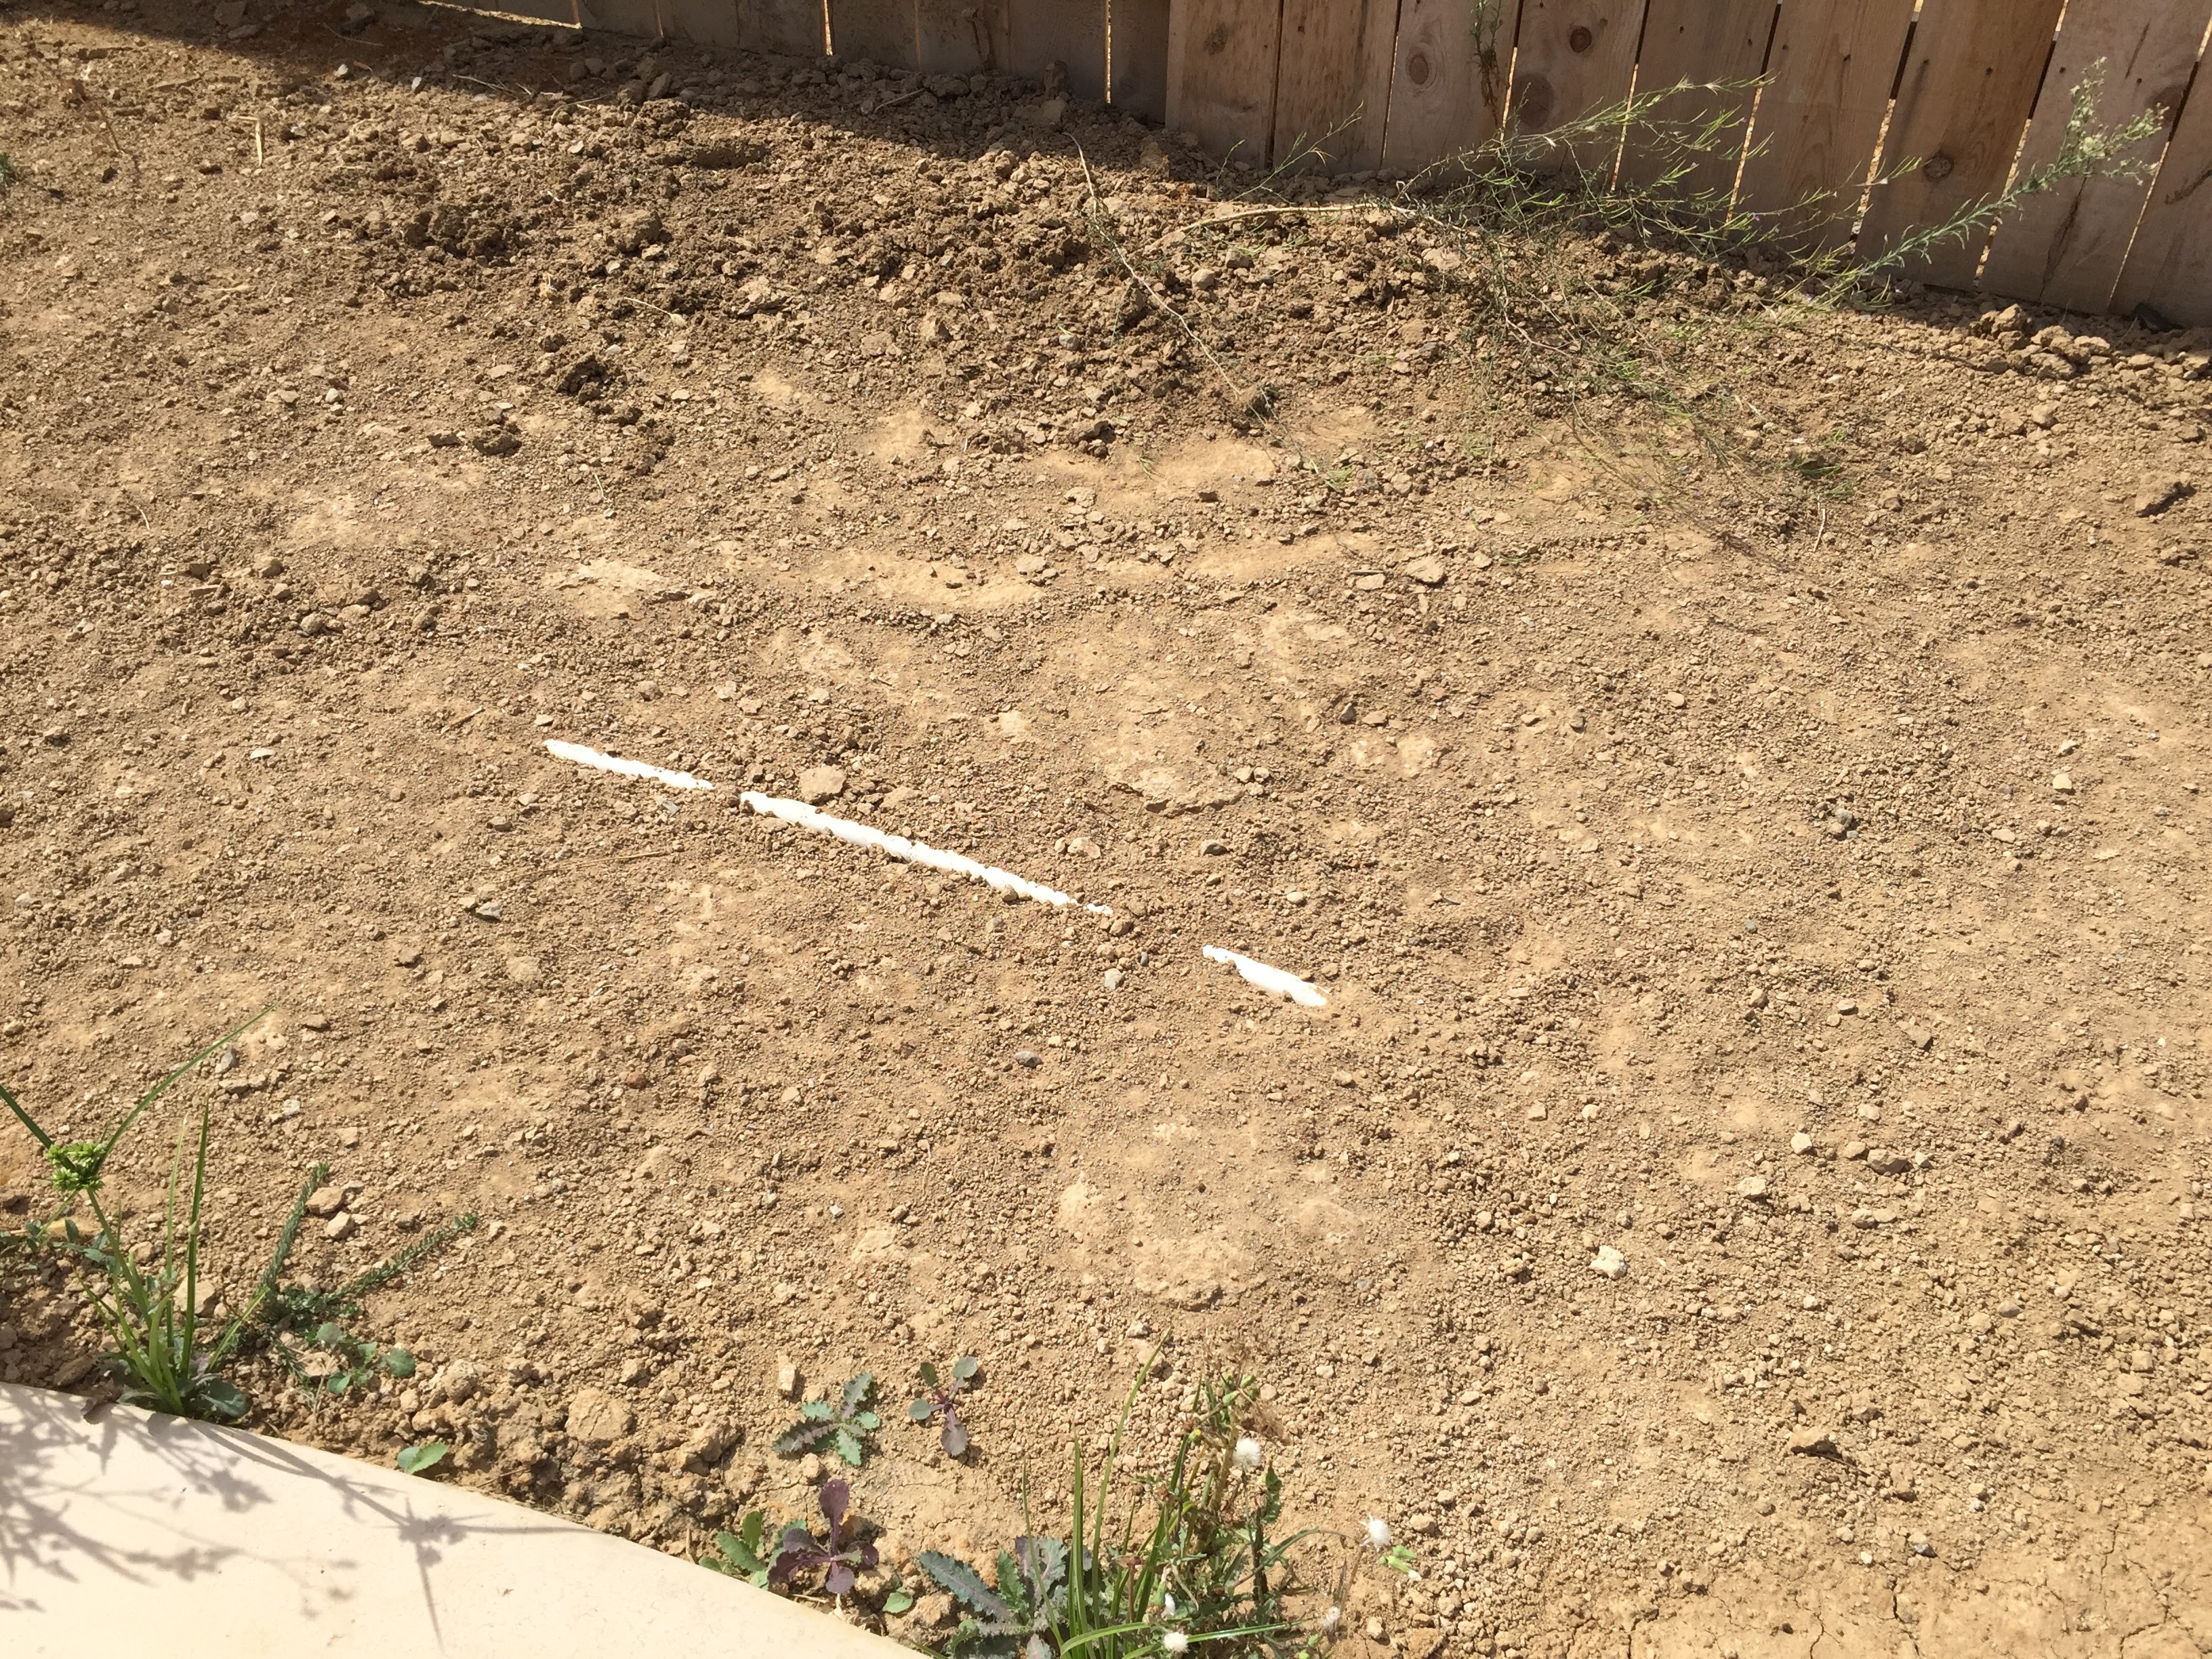 Sprinkler pipes sticking out of the ground. Didn't call PG&E for digging check.